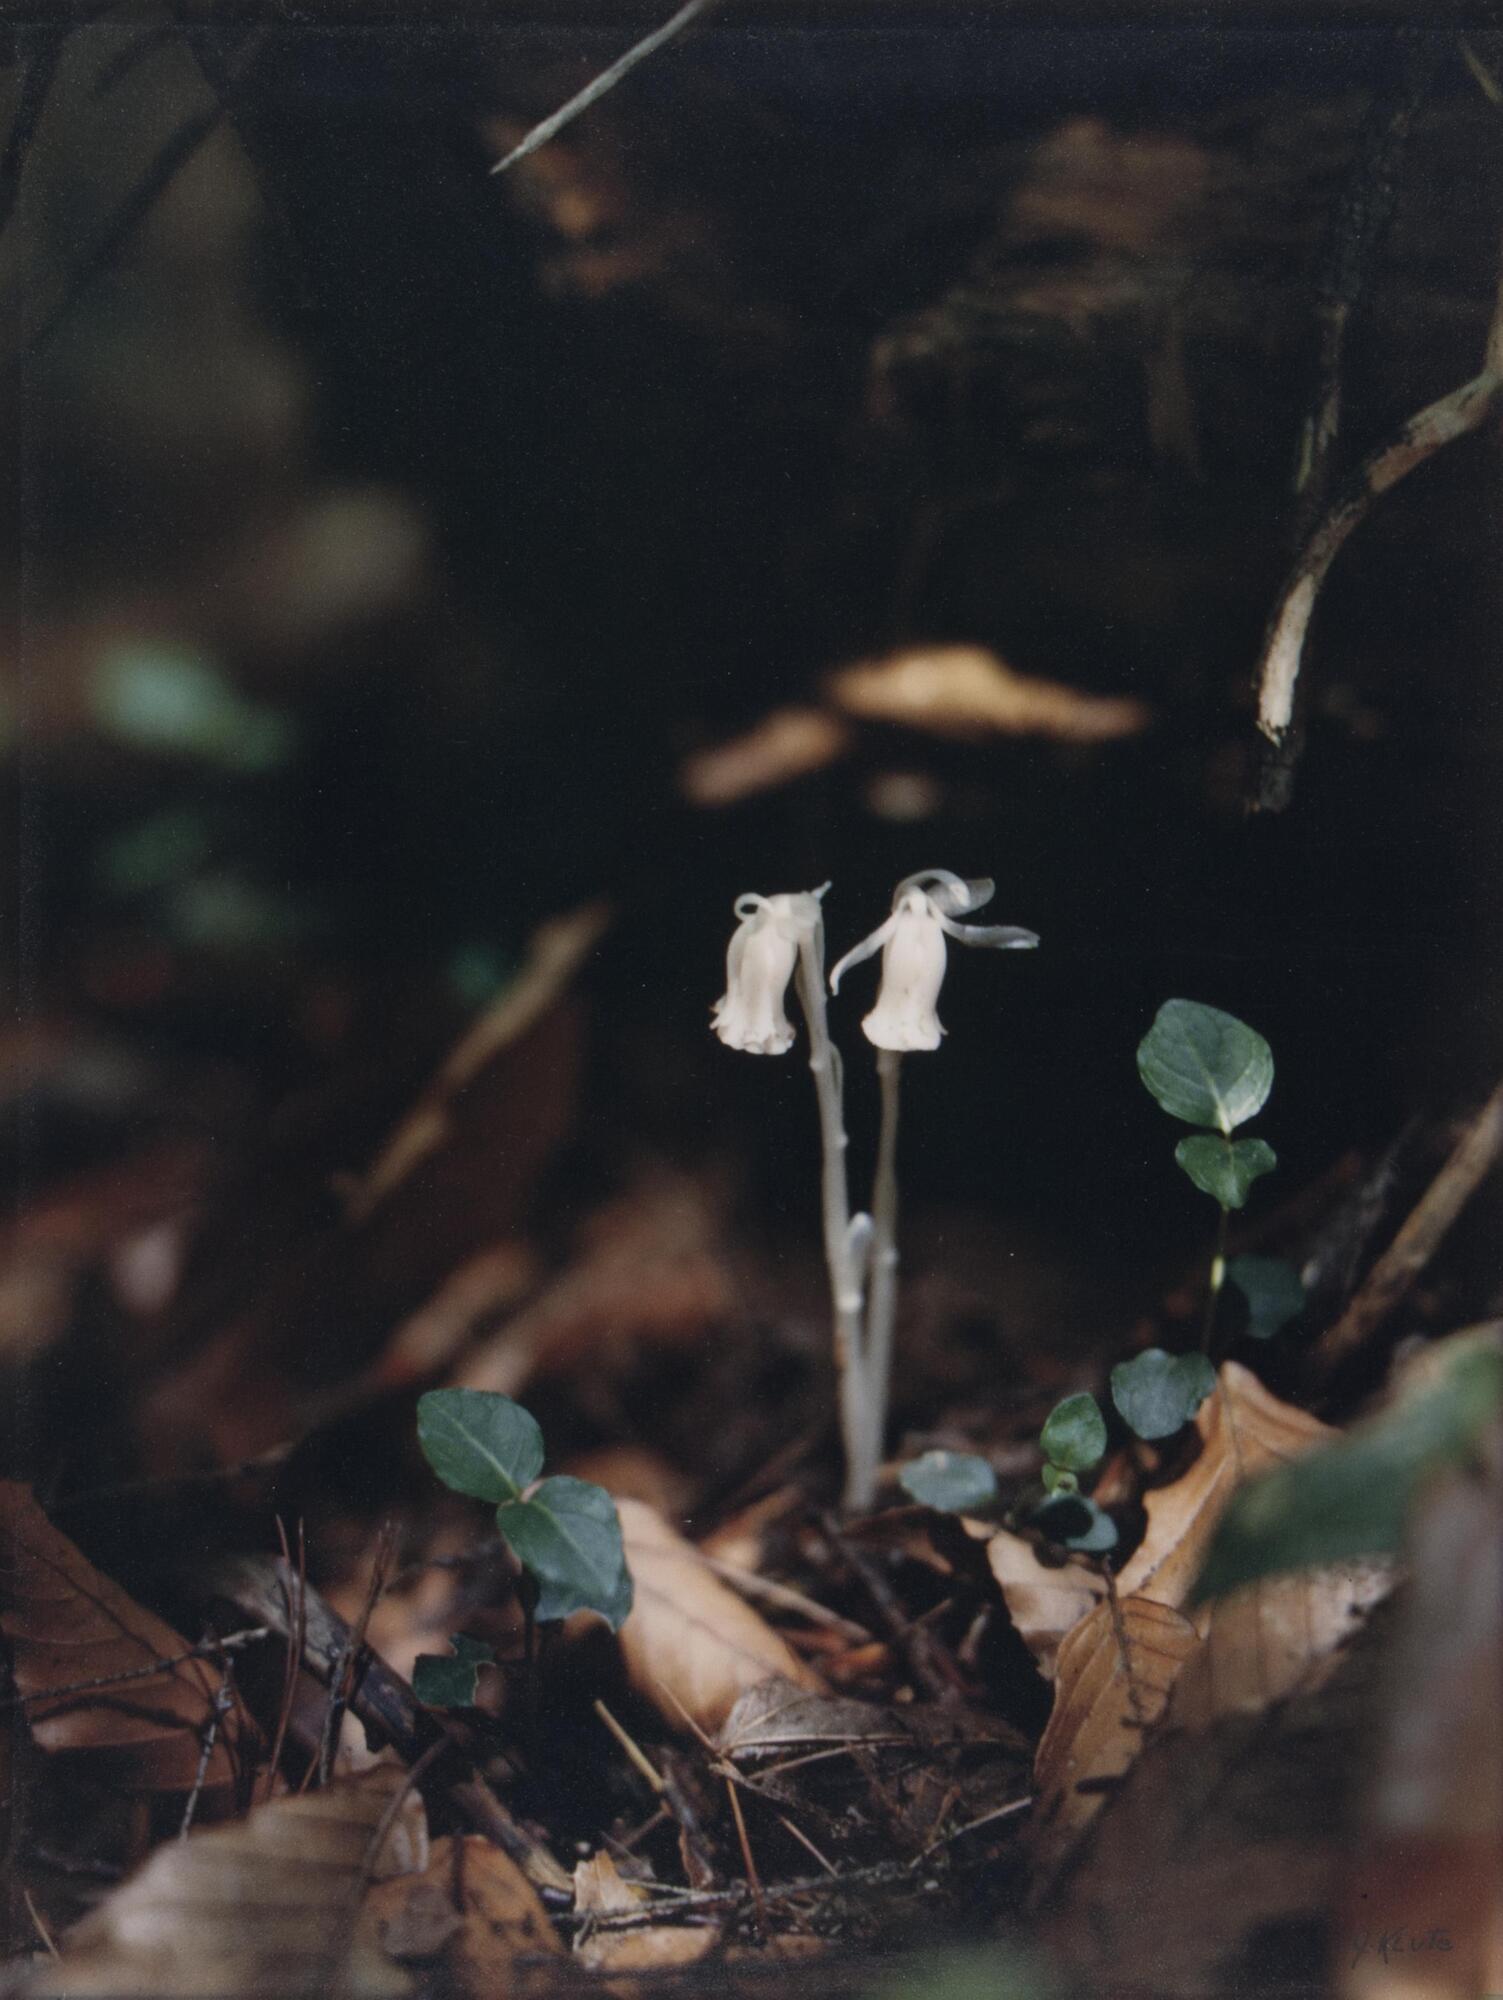 This is a photograph of a small plant, each stem has a single bell-shaped flower. The lower foreground of the image is in focus, with fallen leaves and new undergrowth sprouting around the plant. Beyond the flower, the background is dark and out of focus.